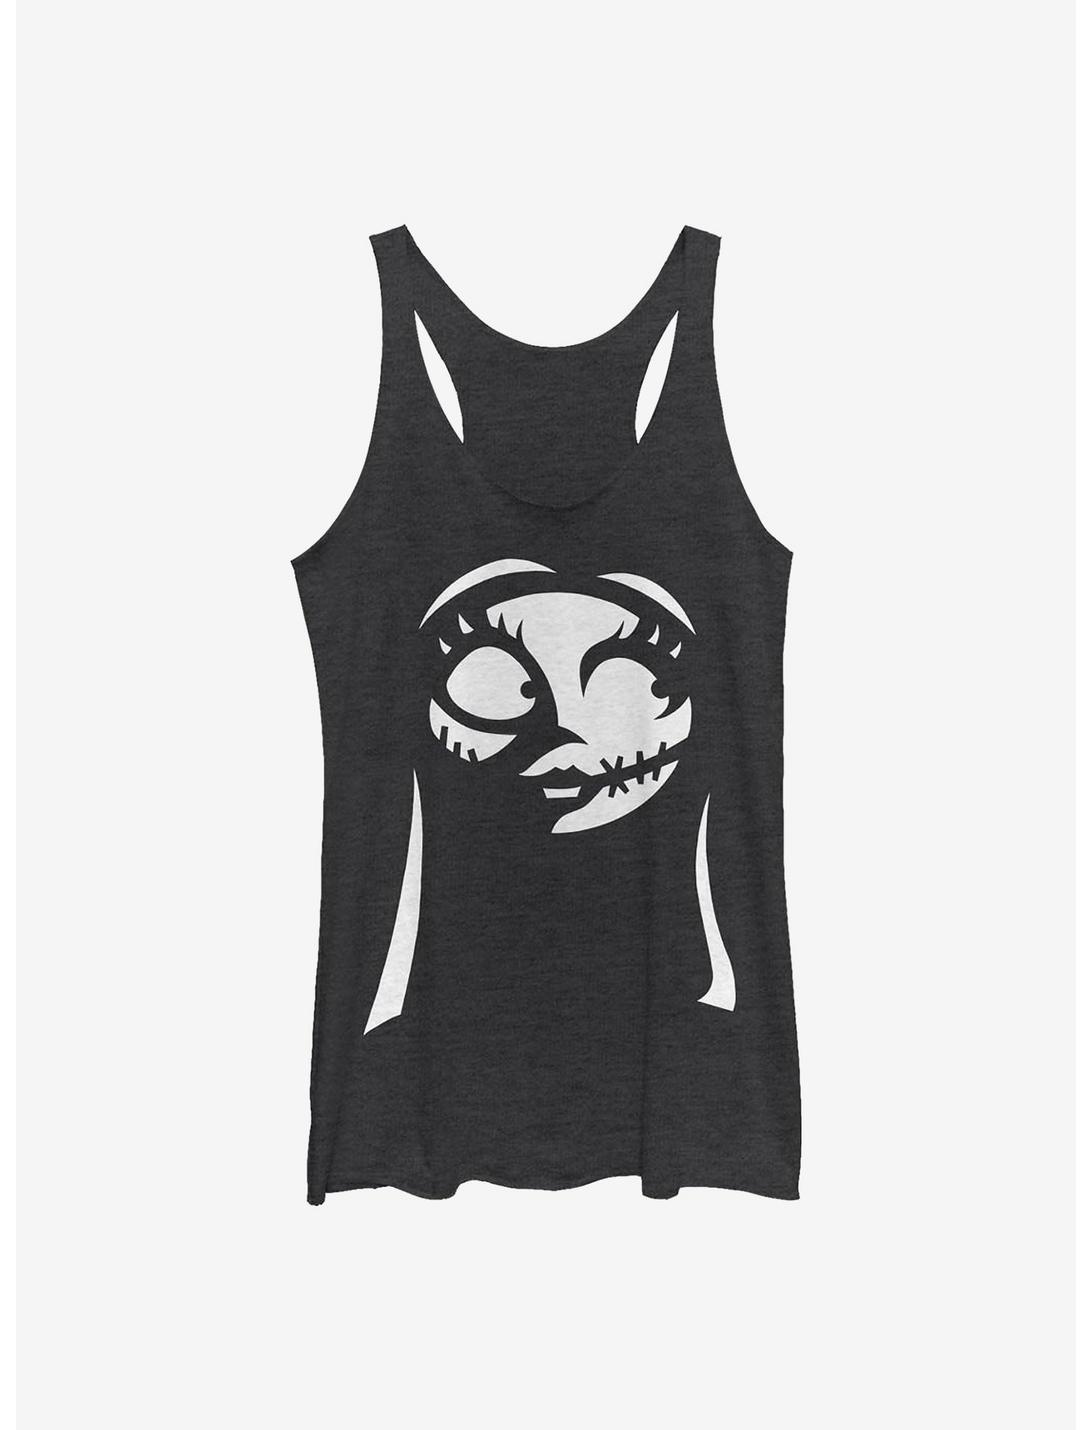 Disney The Nightmare Before Christmas His Sally Womens Tank Top, BLK HTR, hi-res